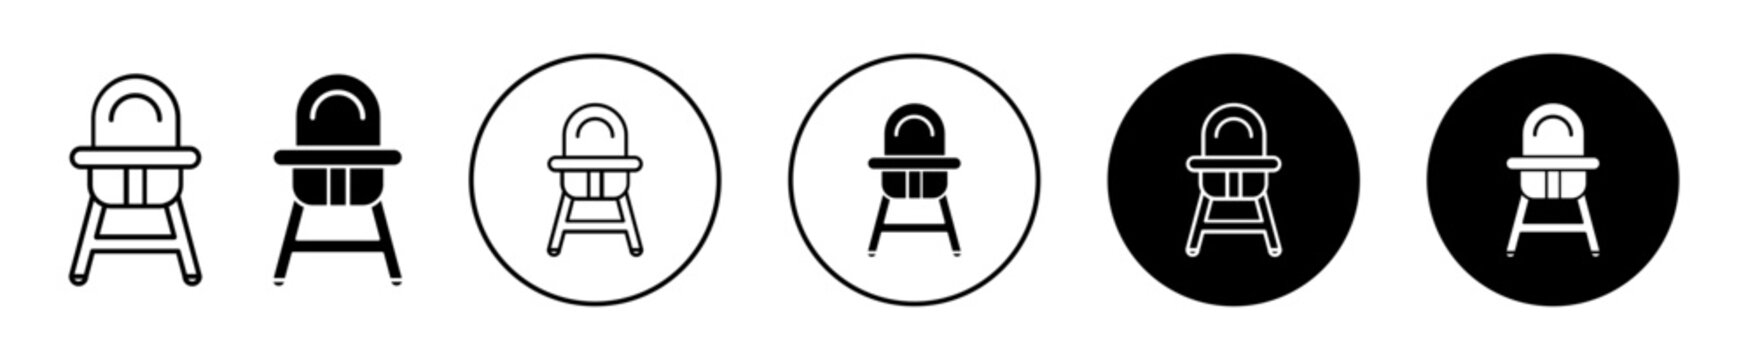 Baby chair icon. child carrier armchair toy symbol set. Toddler or kid sitter buggy stroller vector sign. baby seat stool or pushchair line logo. baby seat chair stroller icon